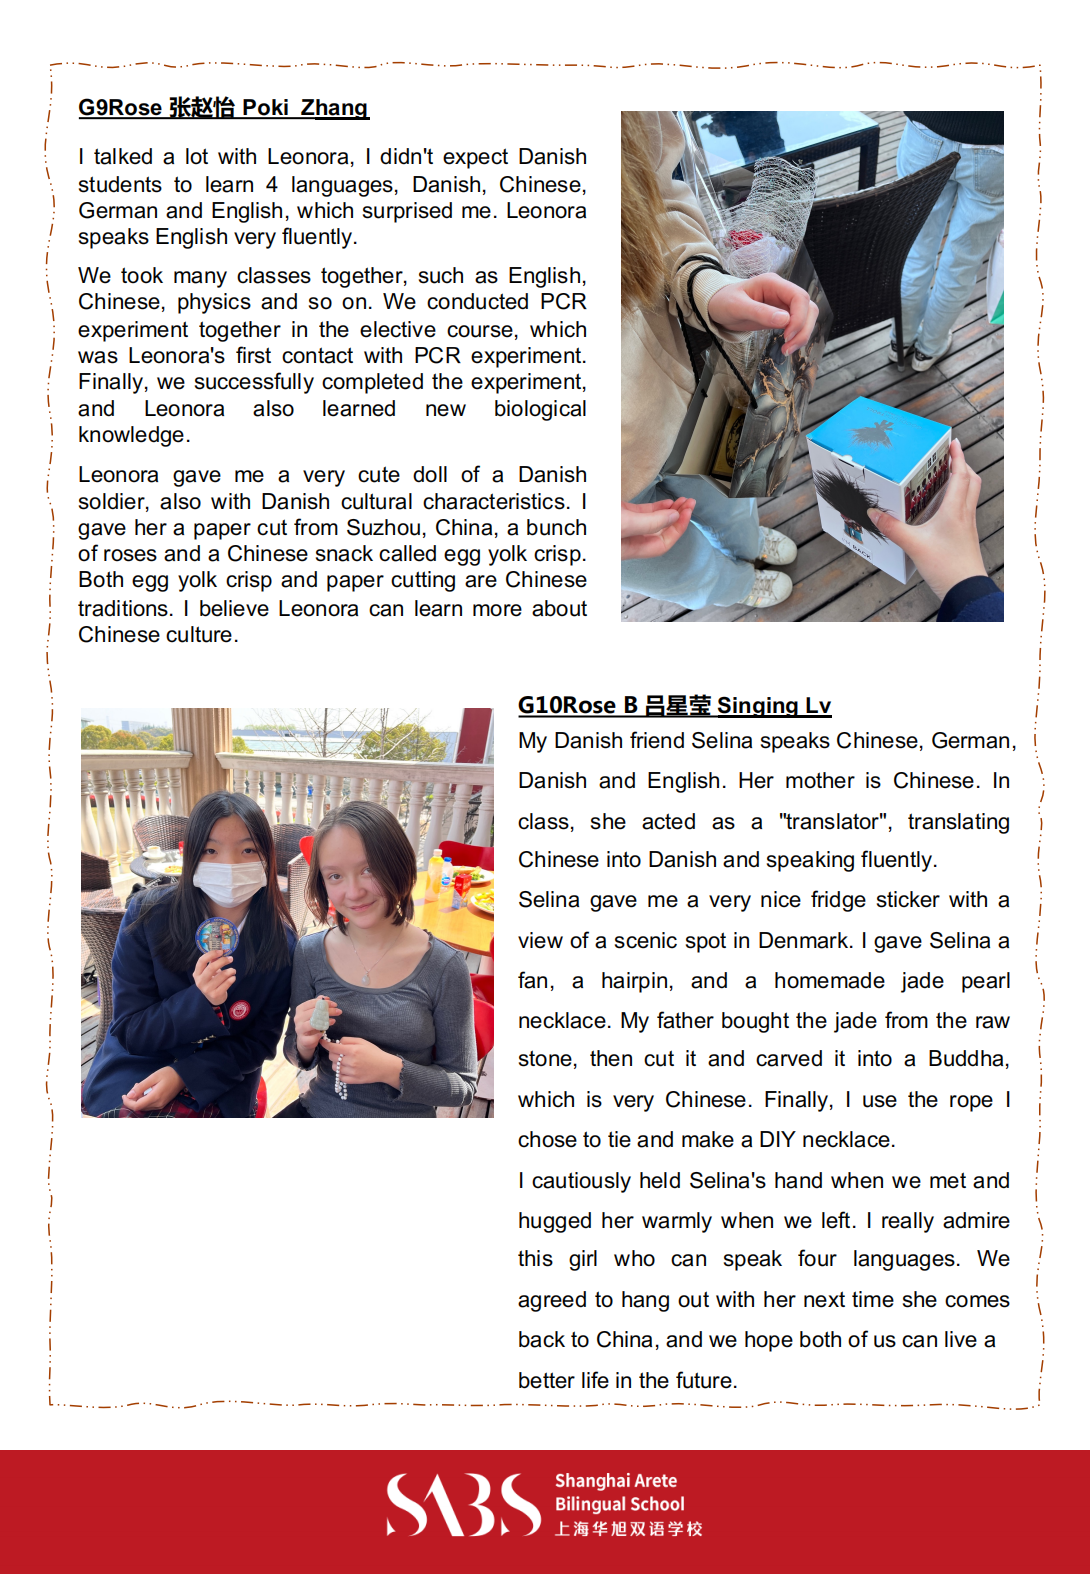 HS 4th Issue Newsletter pptx（English）_06.png